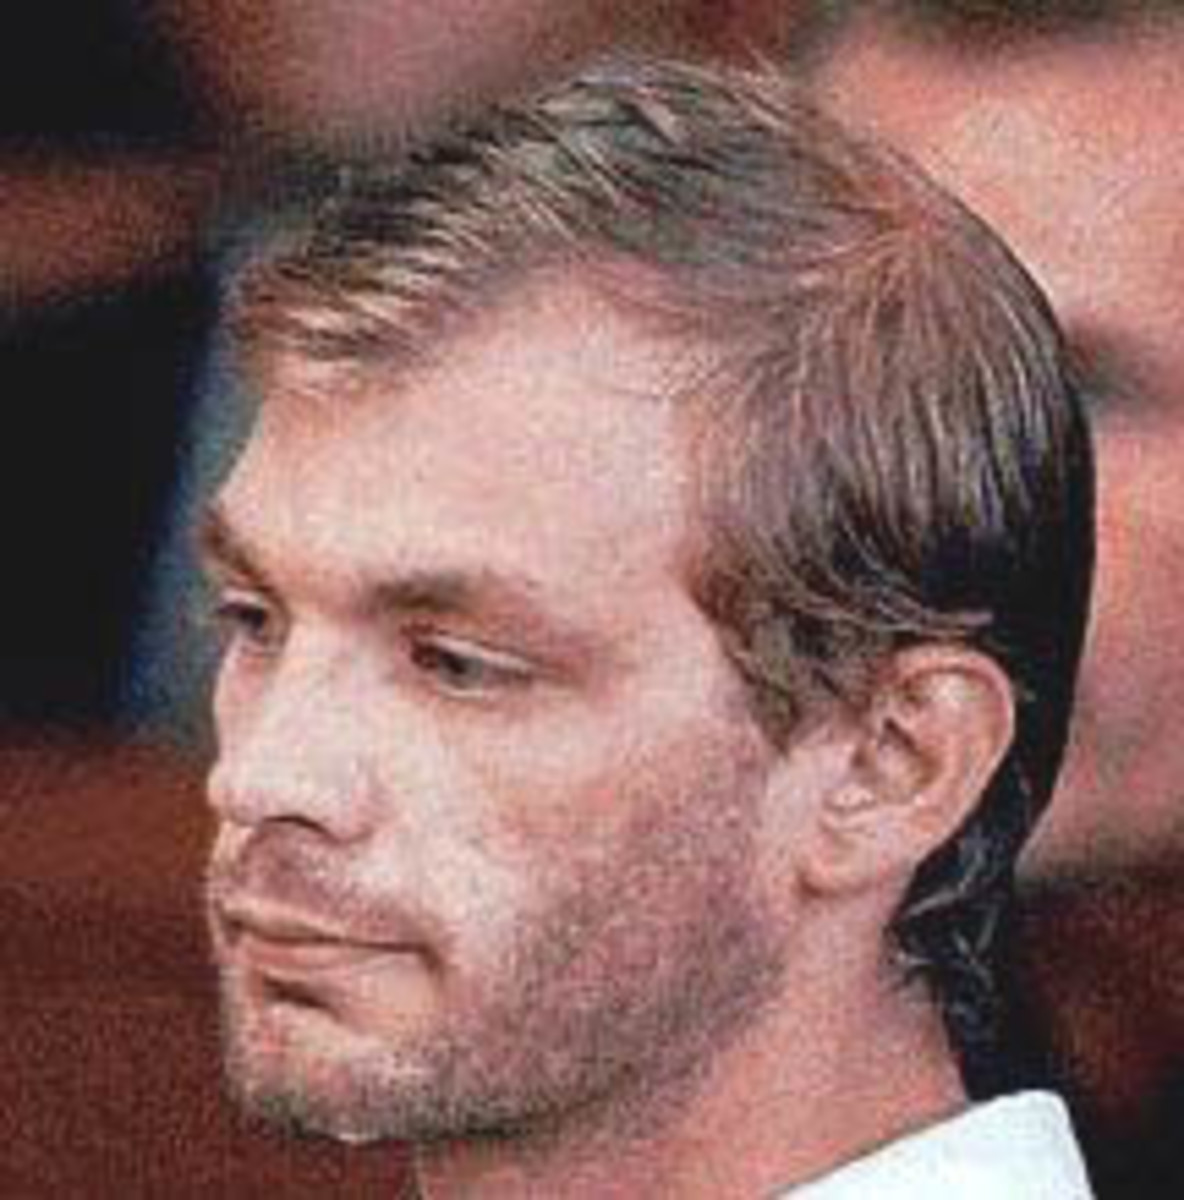 The Evil of Jeffrey Dahmer, not a dull life